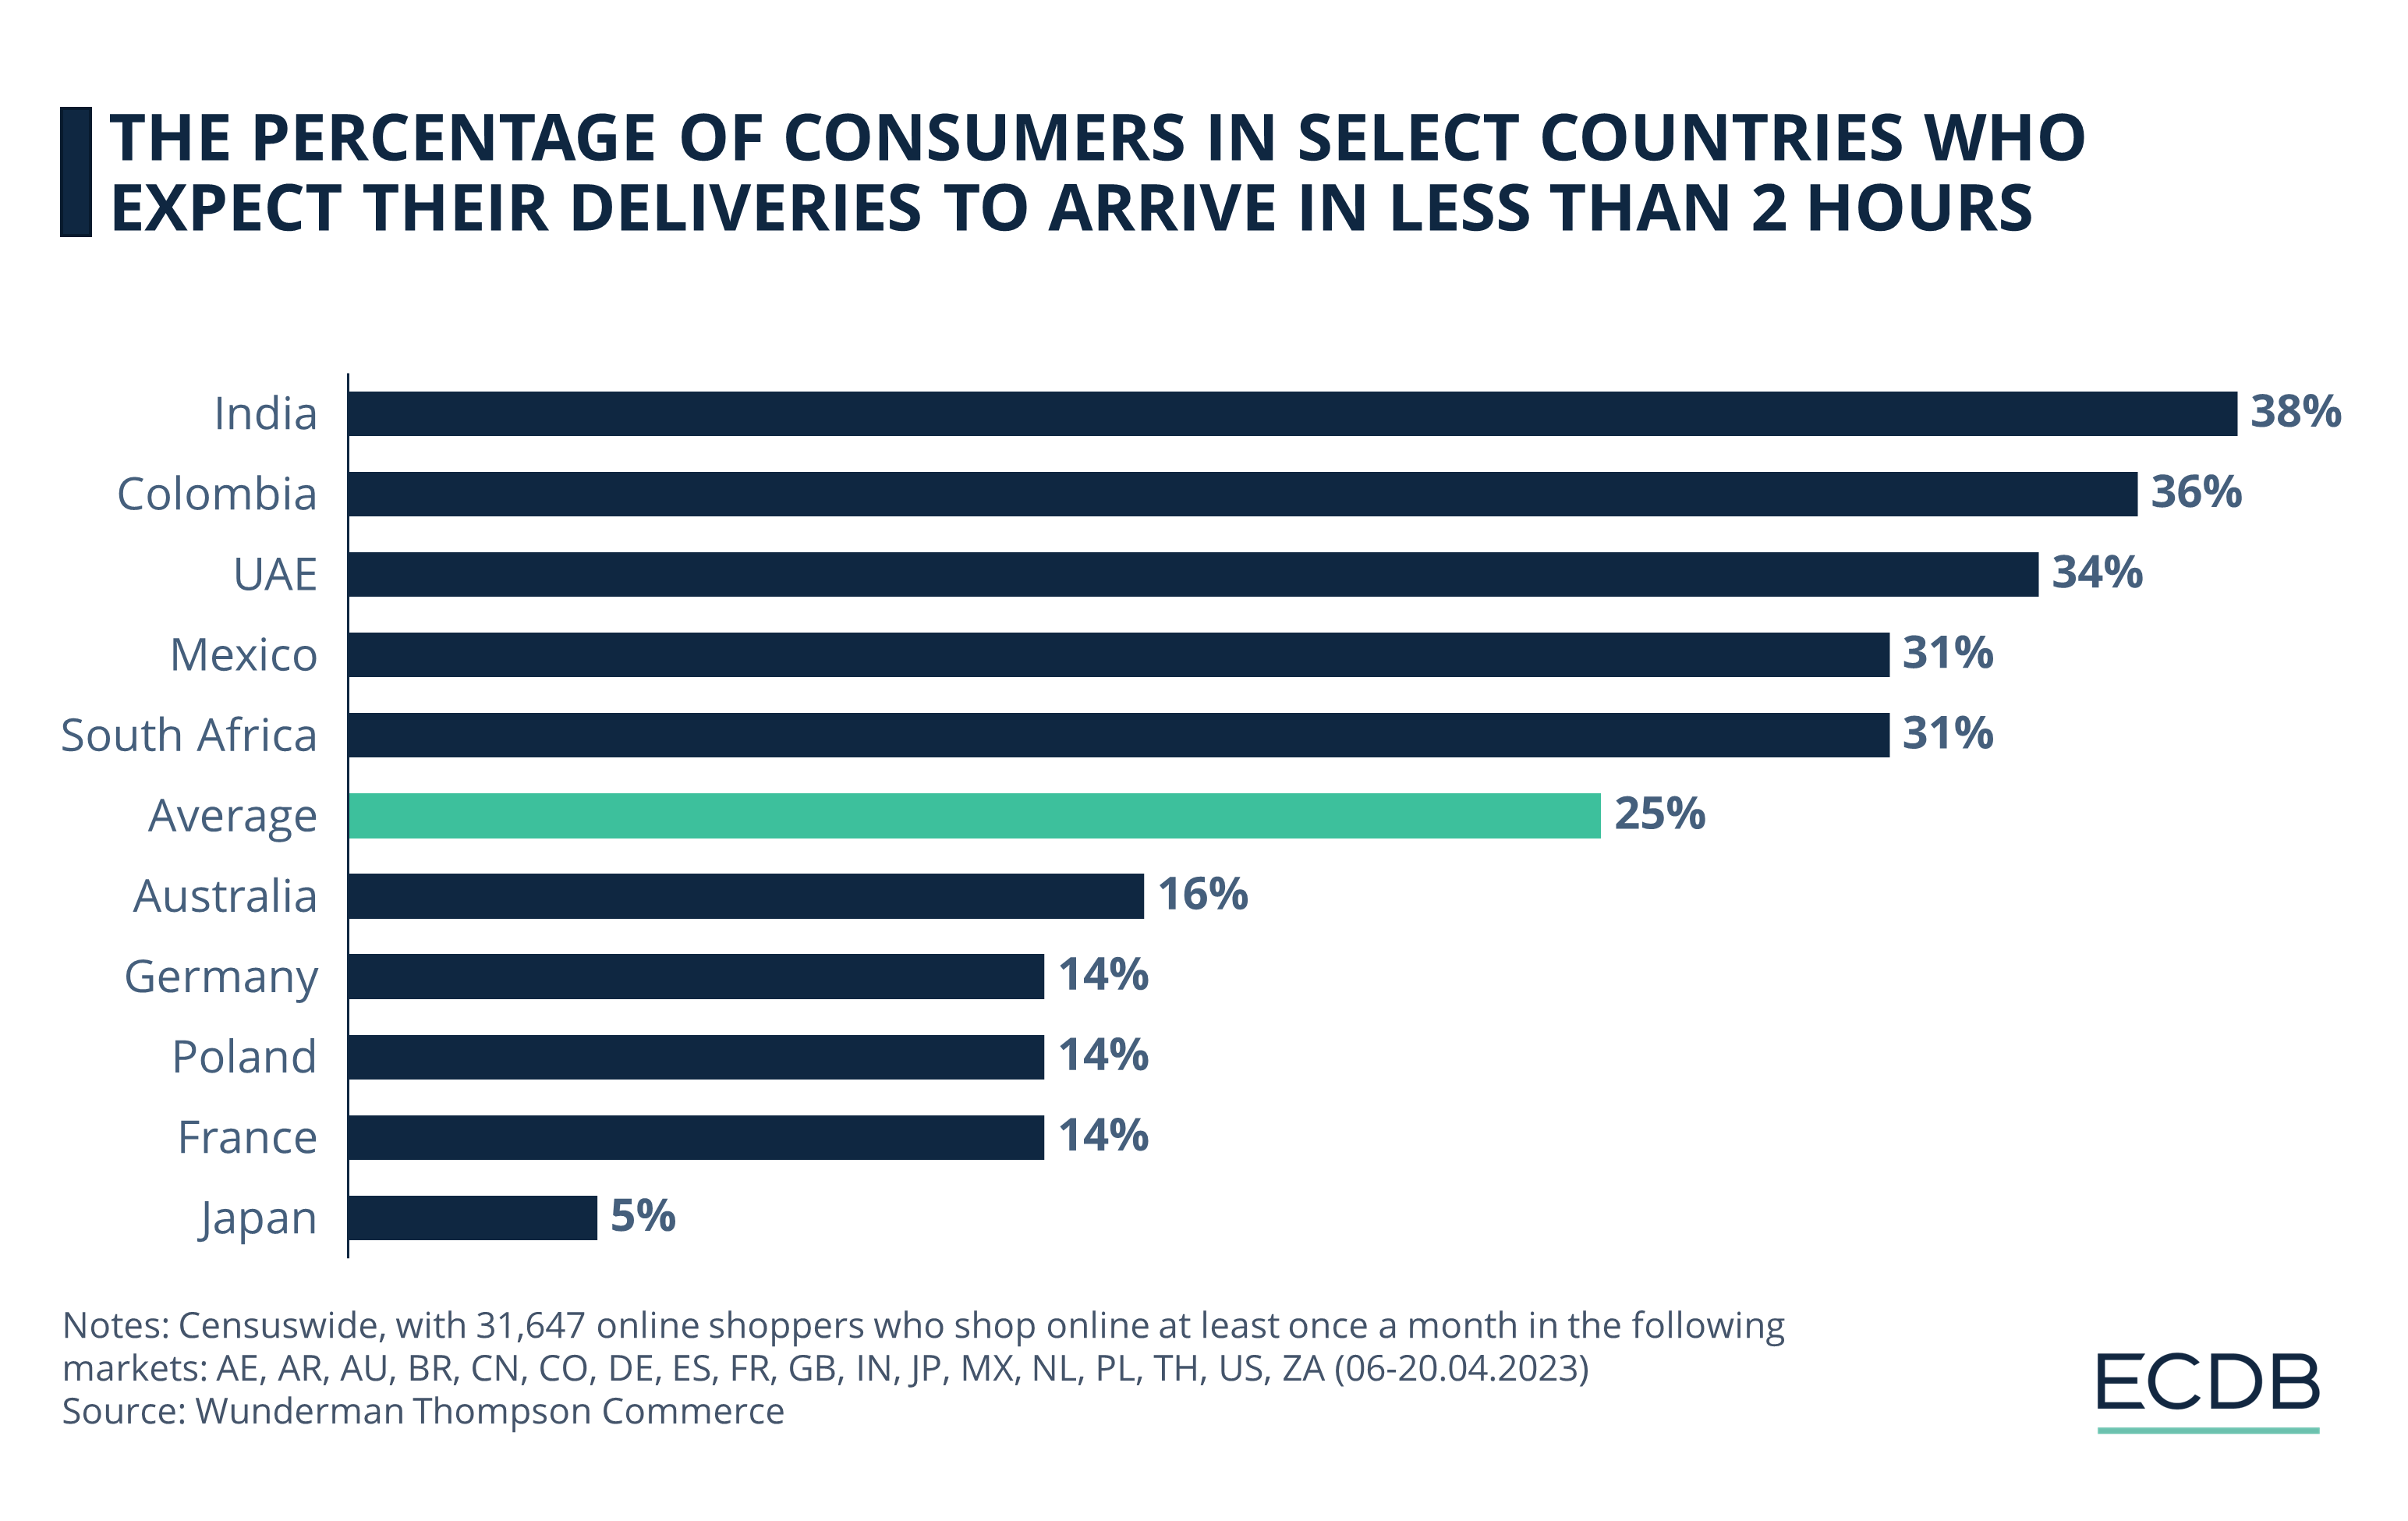 The Percentage of Consumers in Select Countries Who Expect Their Deliveries to Arrive in Less Than 2 Hours